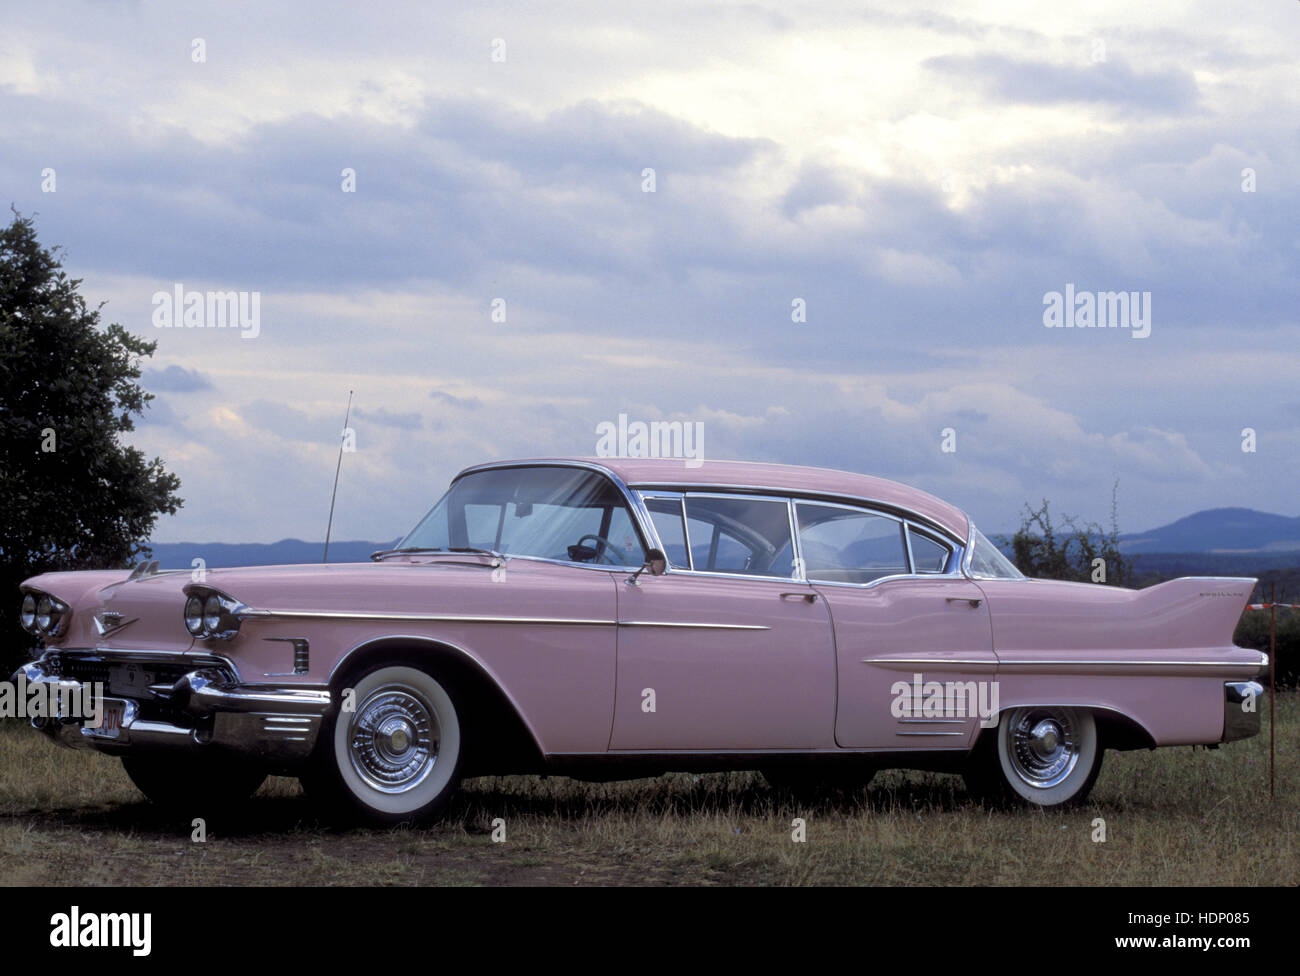 a Cadillac Fleetwood Series 75 from 1958. Stock Photo